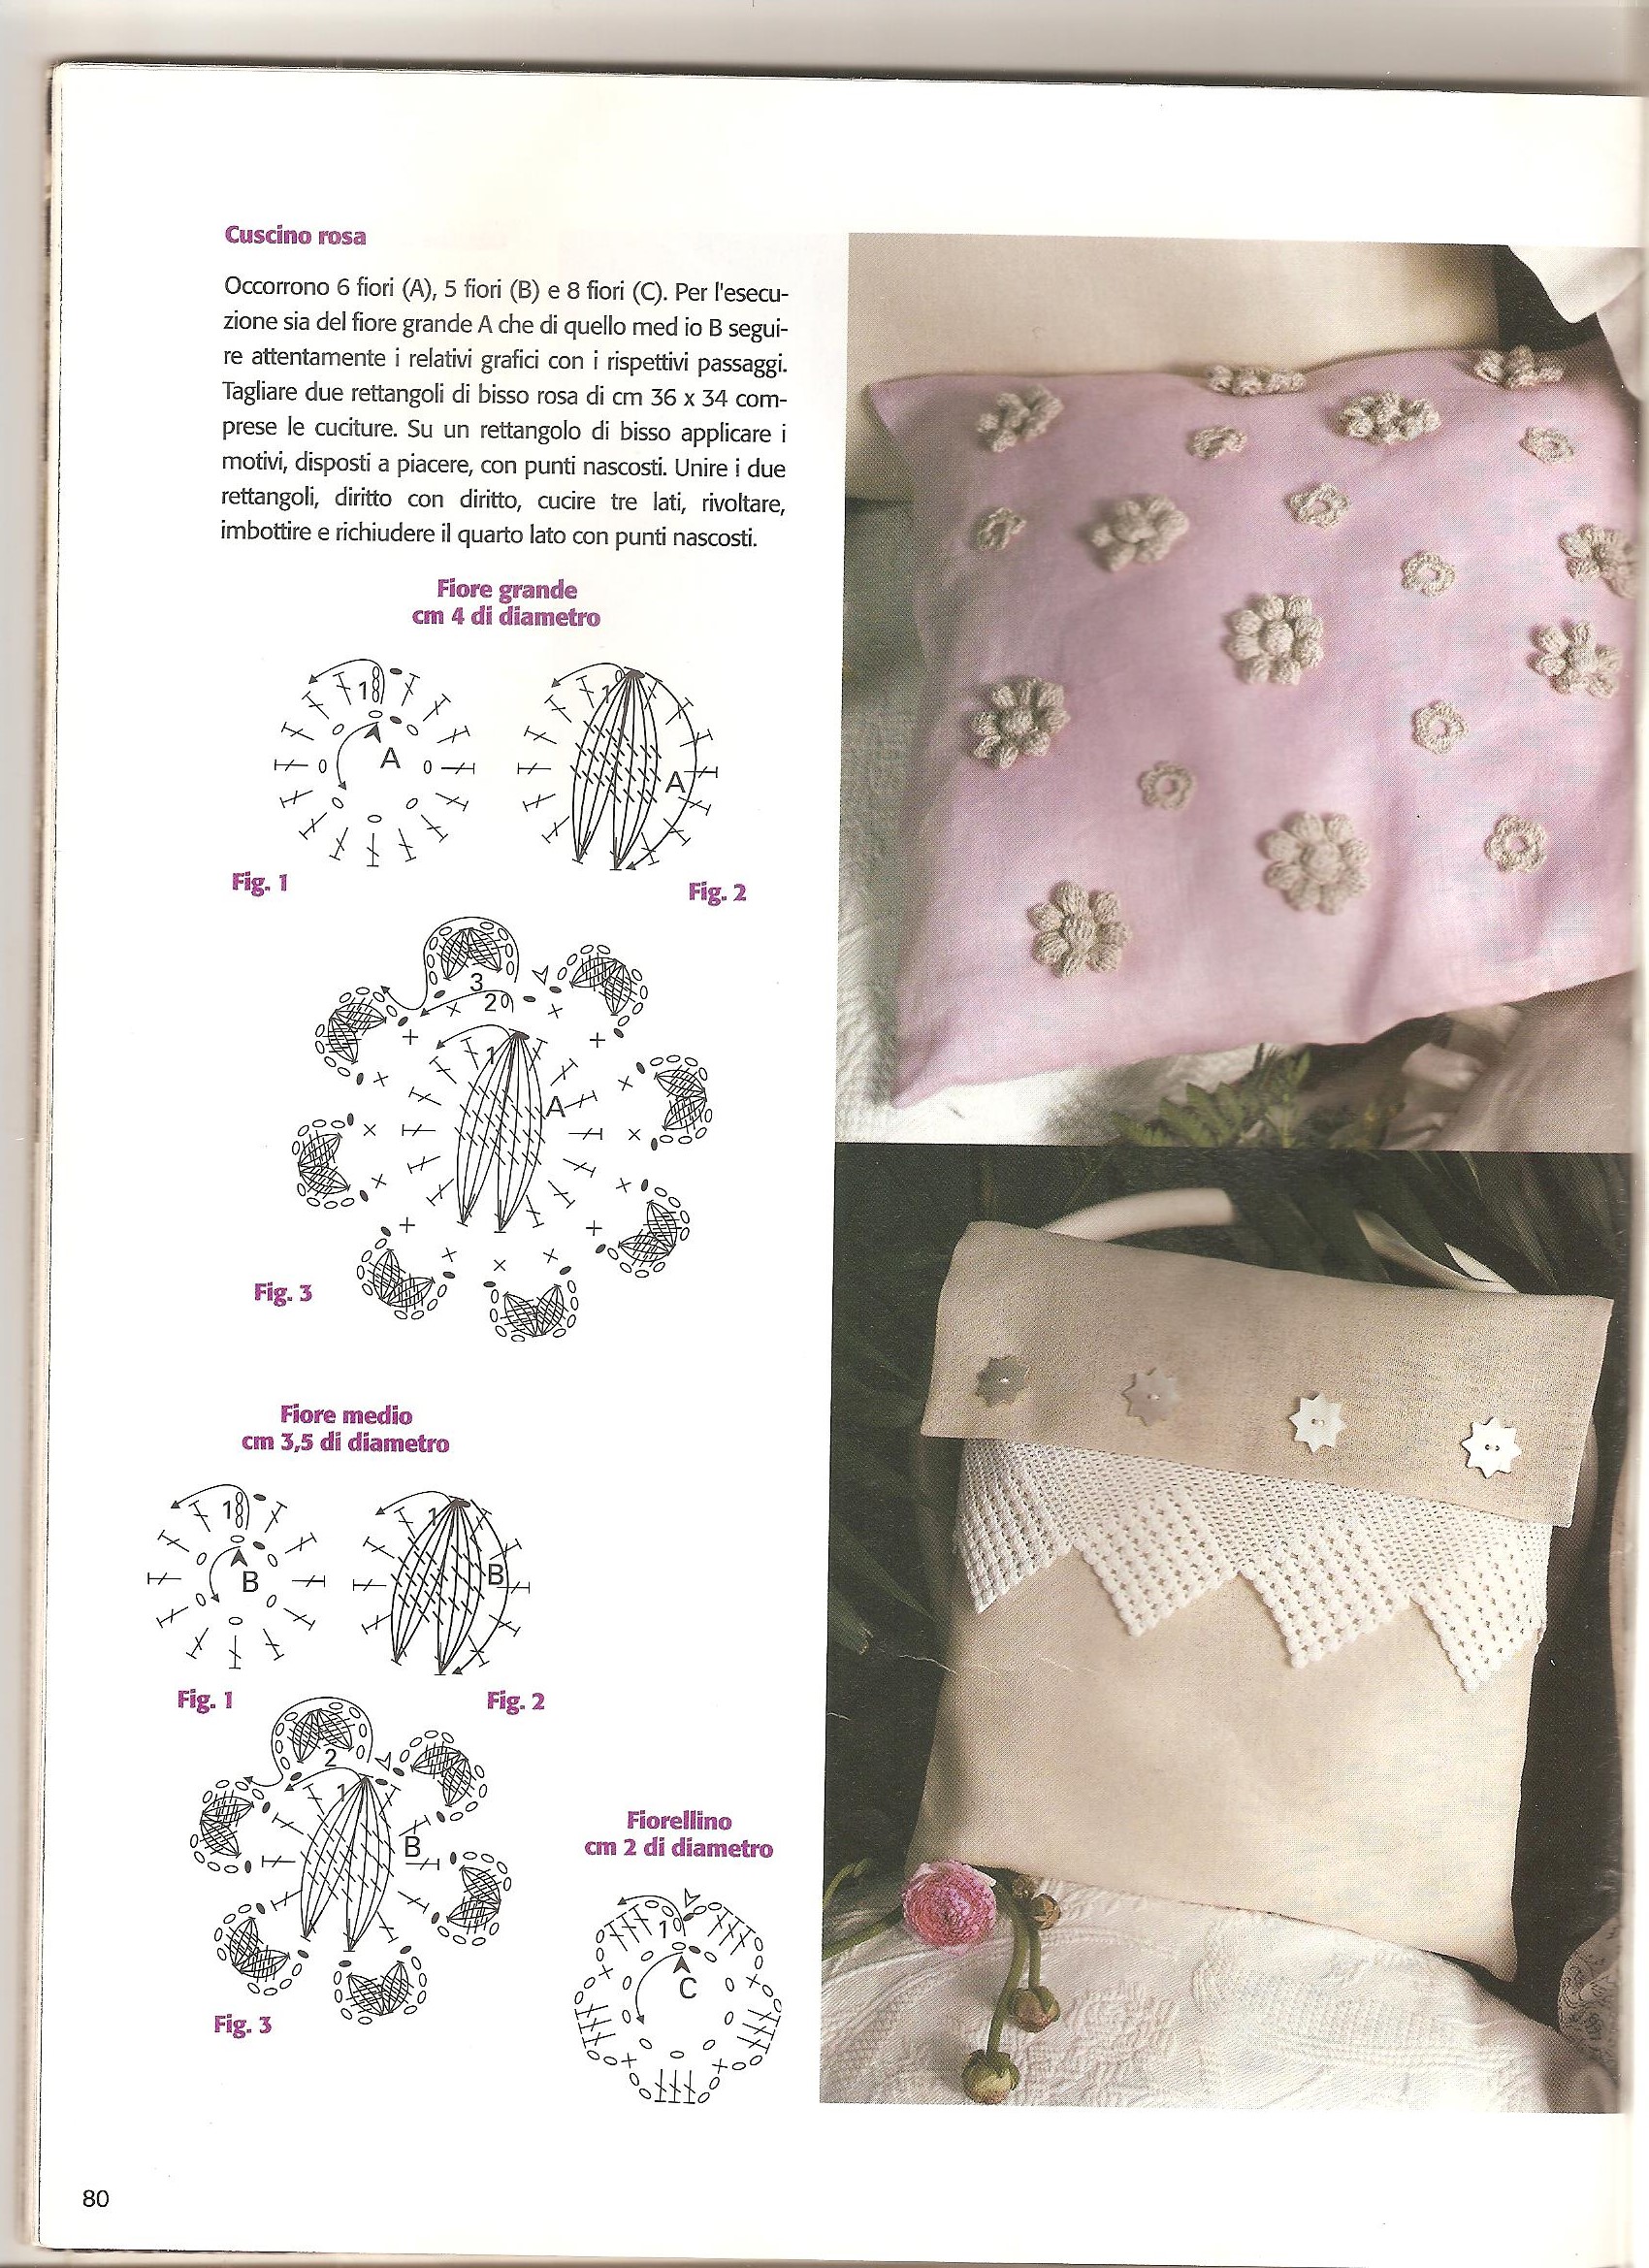 Cuschion pillow with flowers and applications crochet pattern (5)